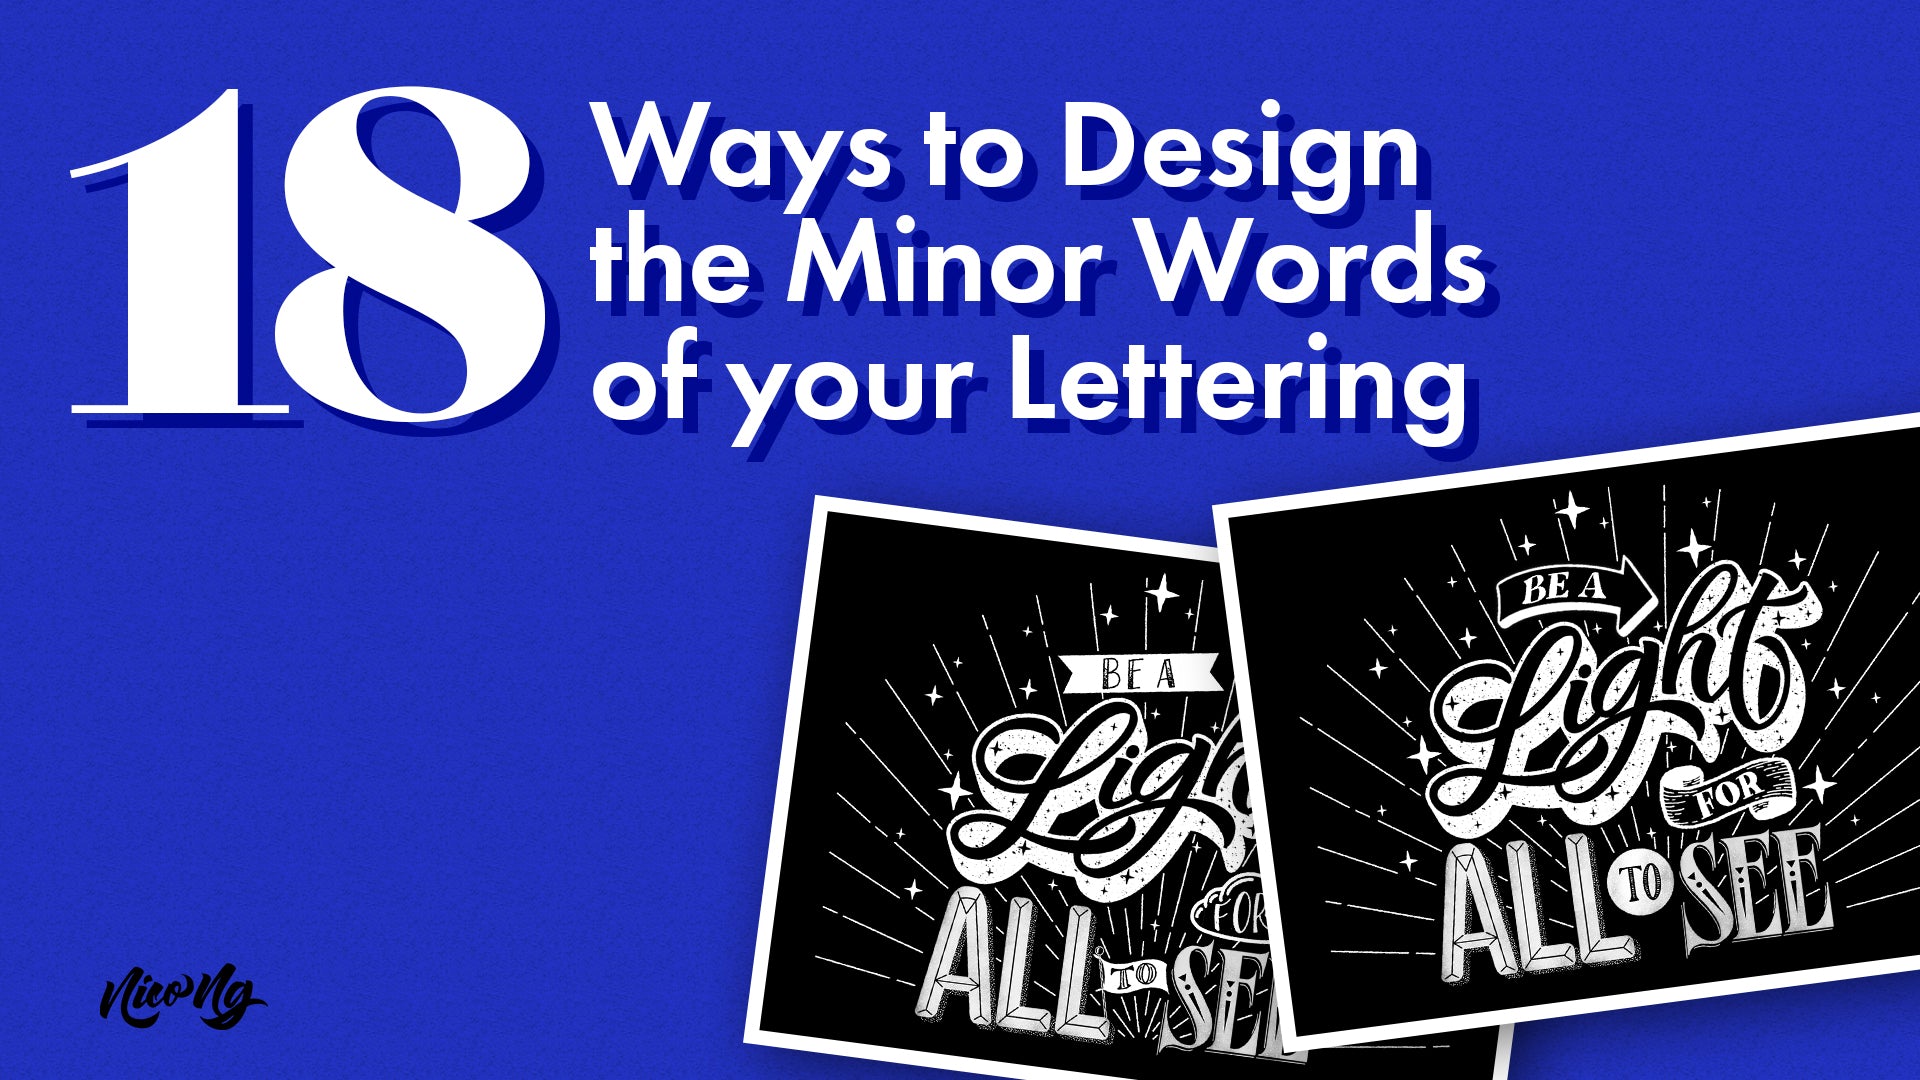 18 Ways to Design the Minor Words of your Lettering